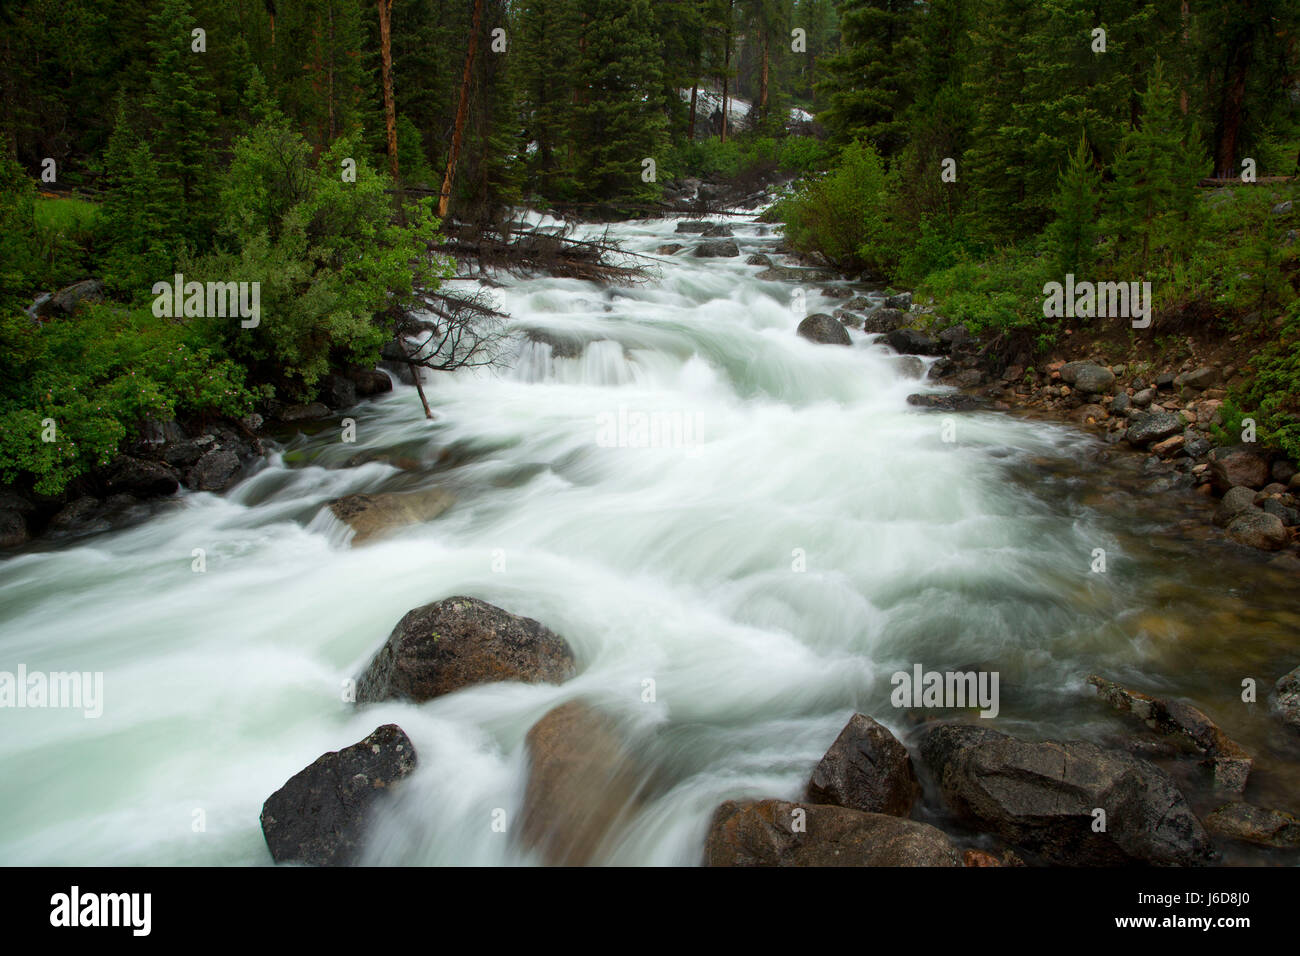 Crazy Creek, Shoshone National Forest, Beartooth Highway Scenic Byway, Wyoming Stock Photo